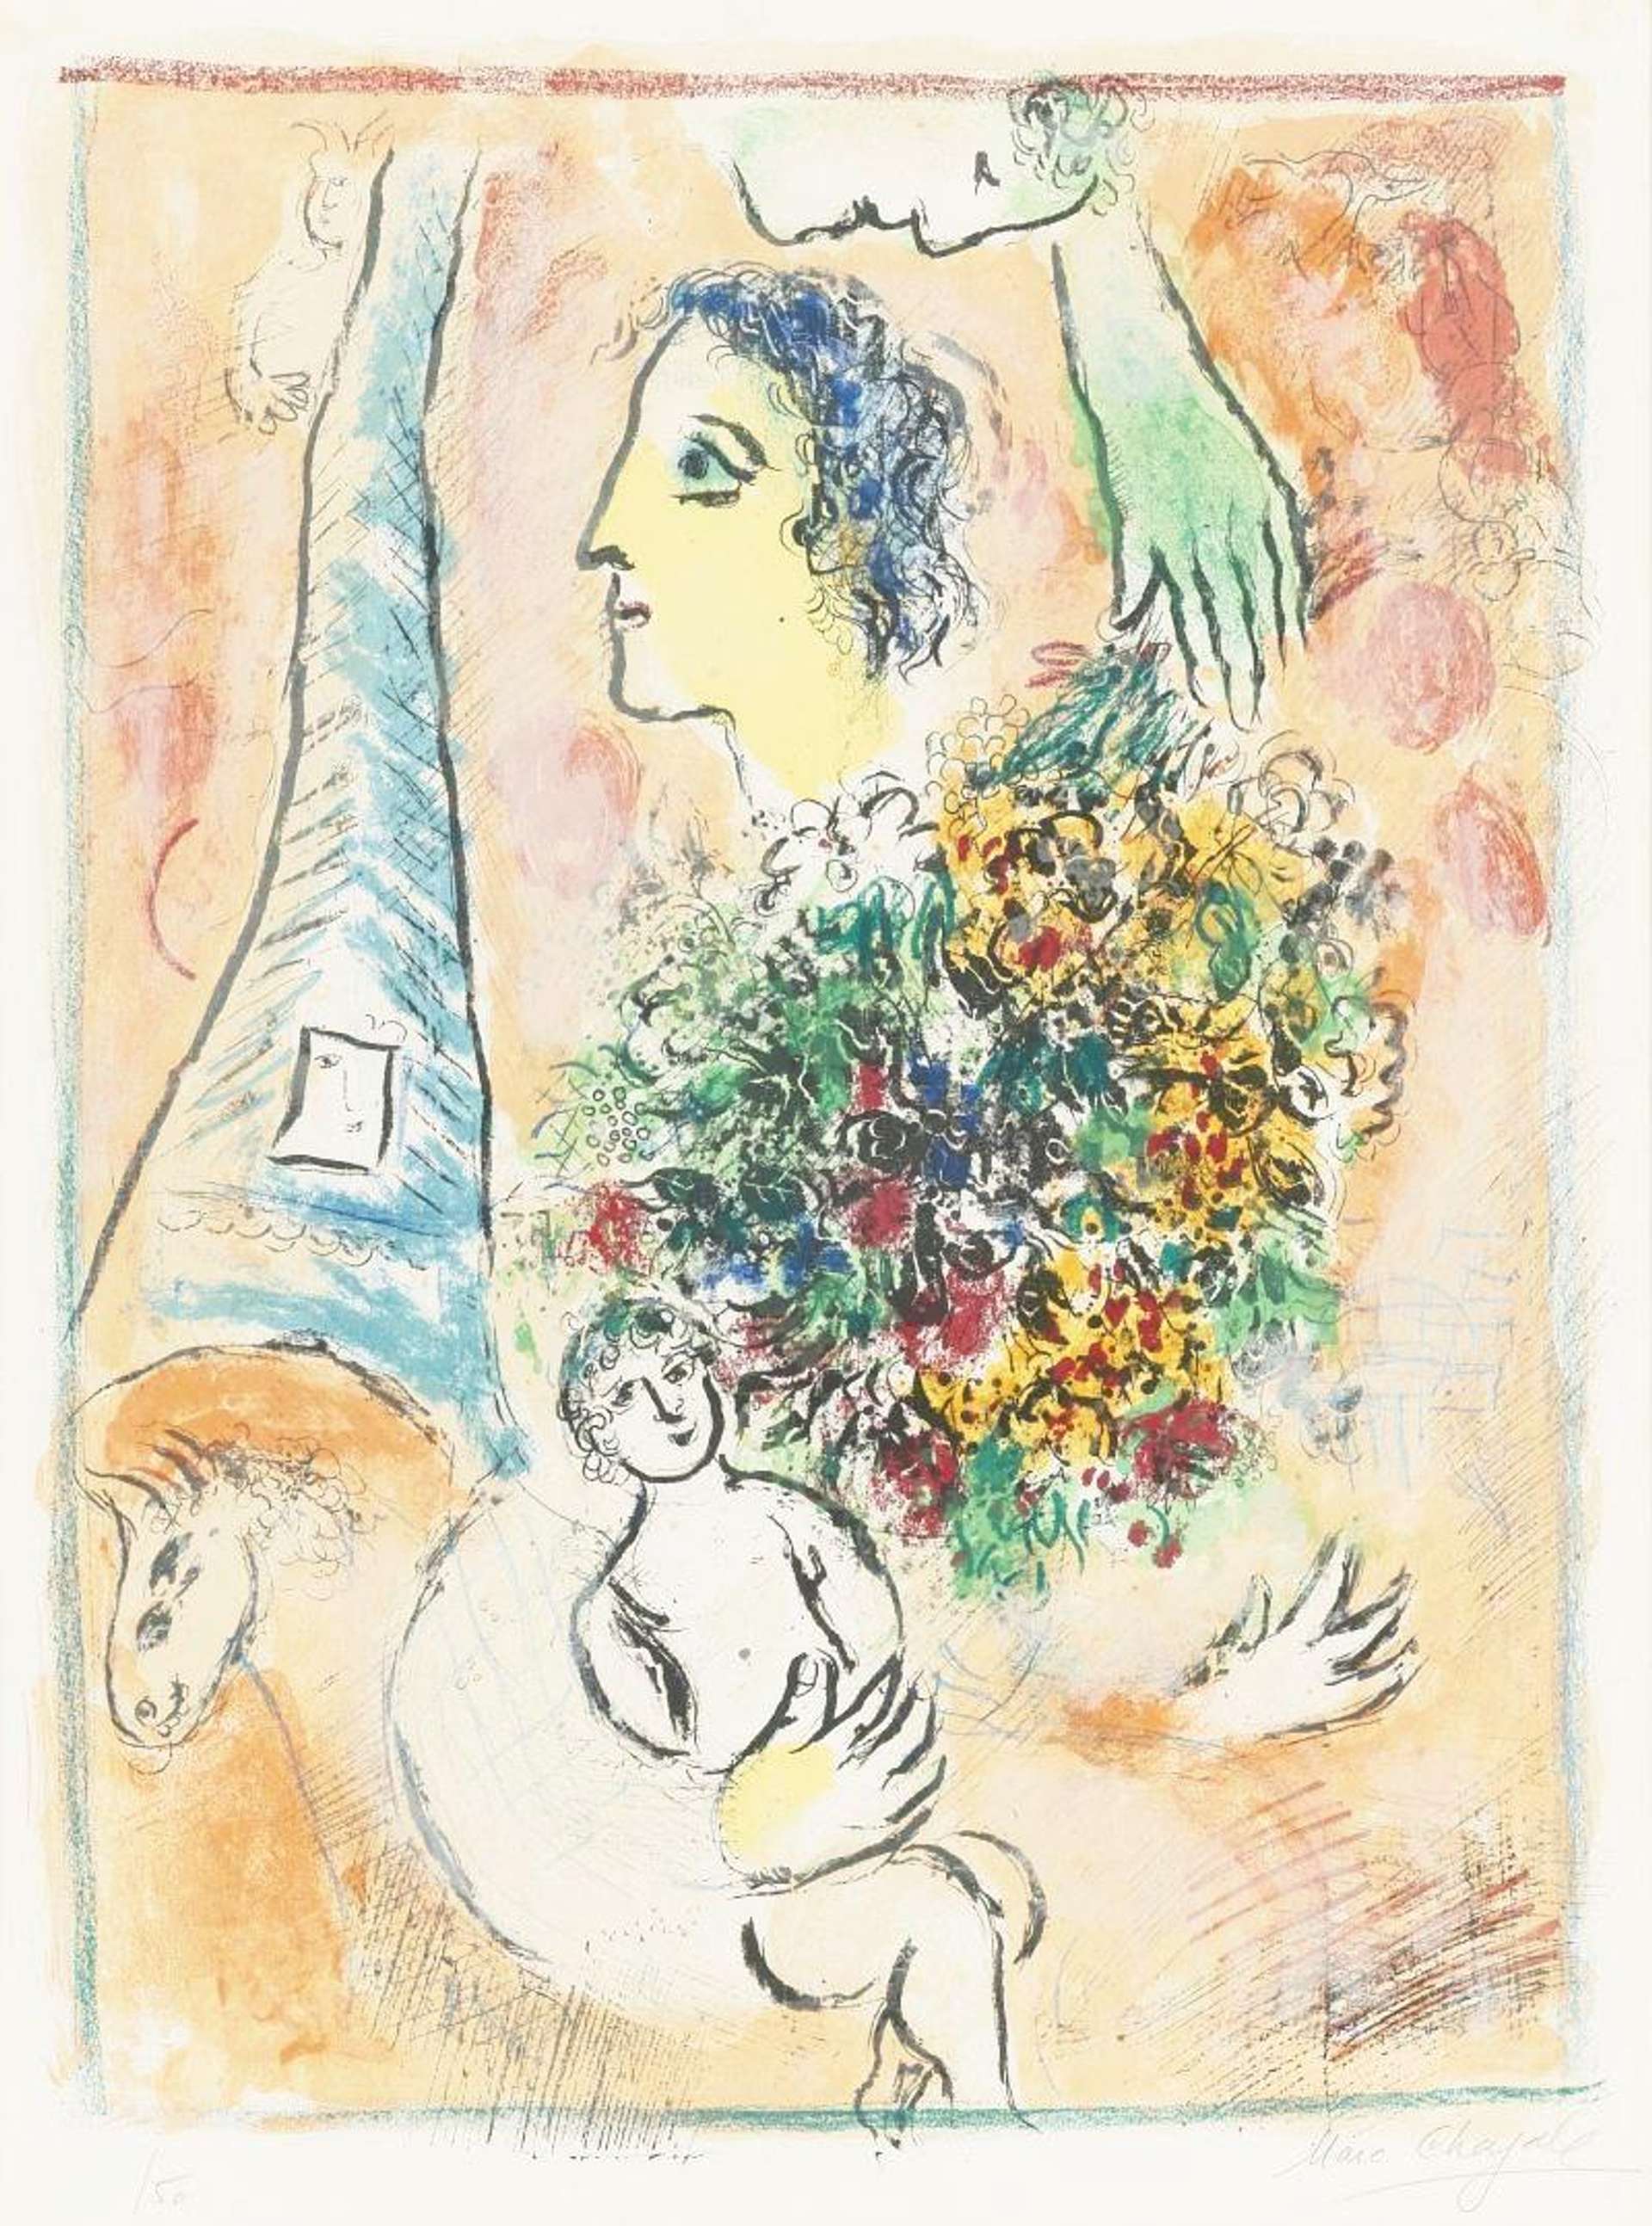 Marc Chagall: Tribute To The Eiffel Tower - Signed Print